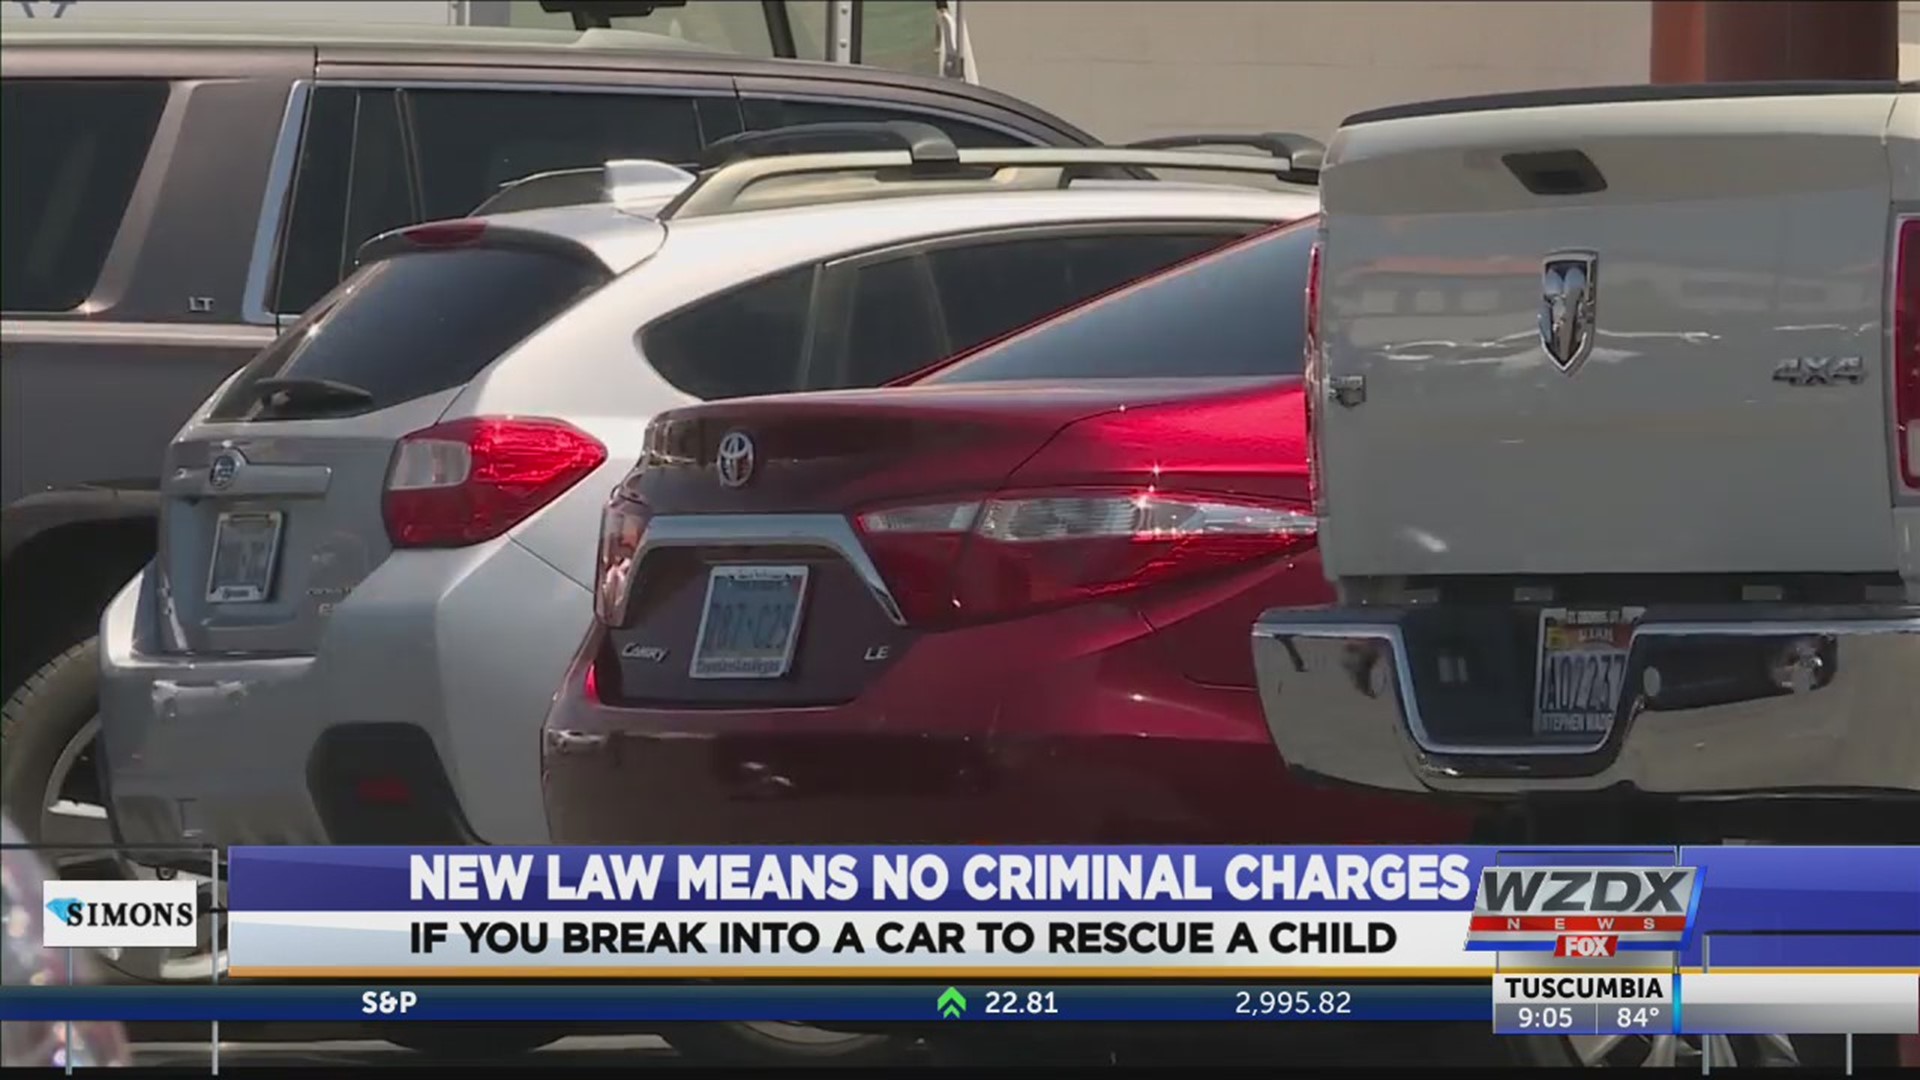 New law means no criminal charges for breaking into car to rescue child